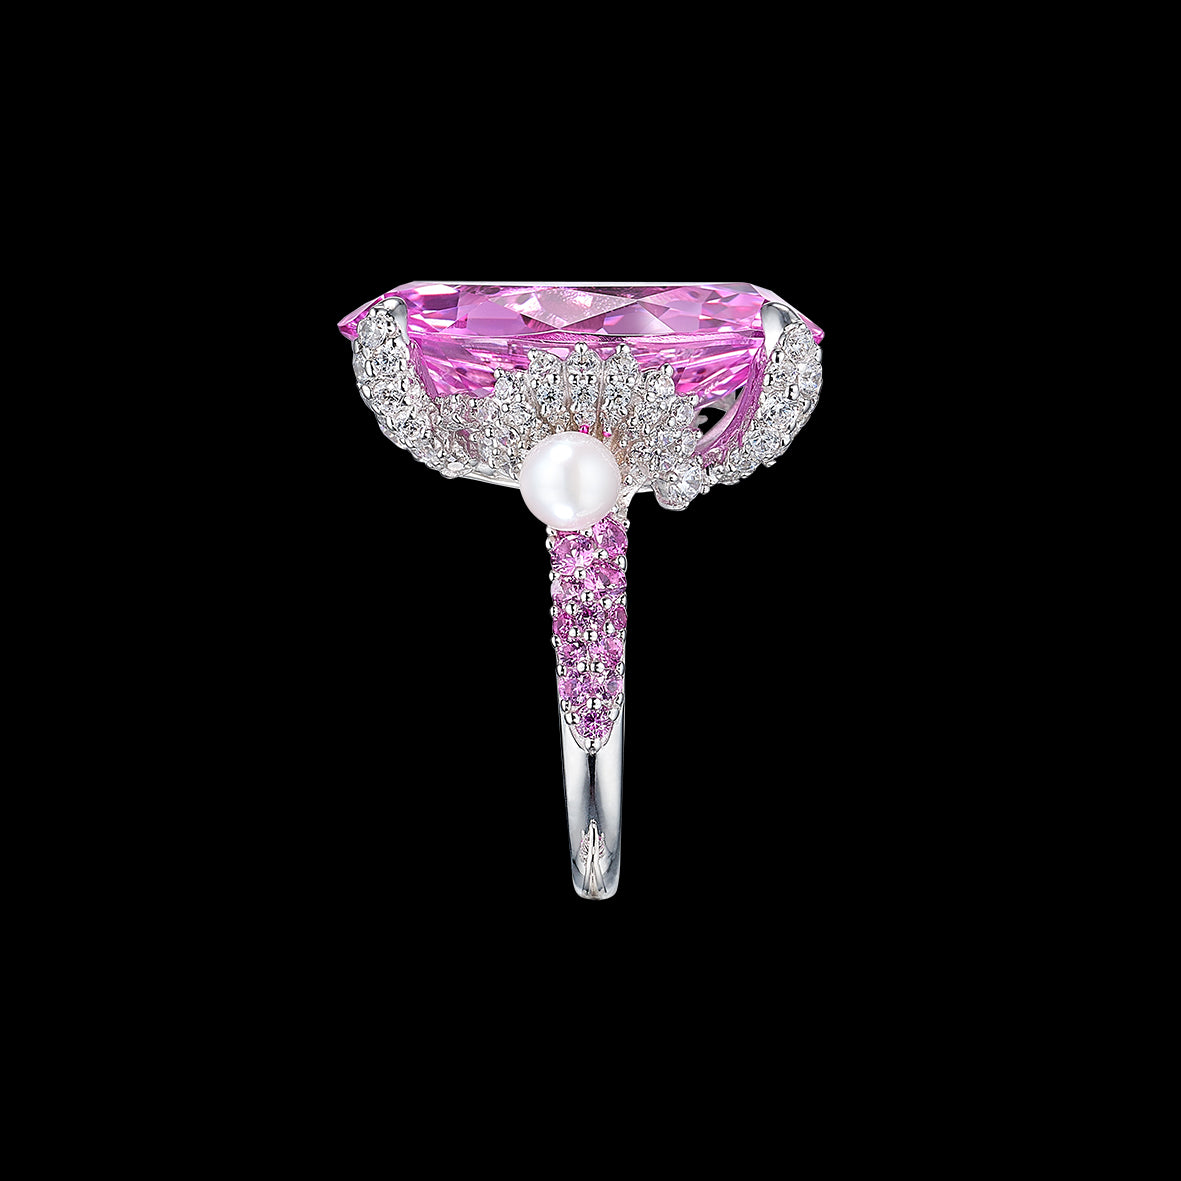 Pale Rose Mermaid Ring, Ring, Anabela Chan Joaillerie - Fine jewelry with laboratory grown and created gemstones hand-crafted in the United Kingdom. Anabela Chan Joaillerie is the first fine jewellery brand in the world to champion laboratory-grown and created gemstones with high jewellery design, artisanal craftsmanship and a focus on ethical and sustainable innovations.